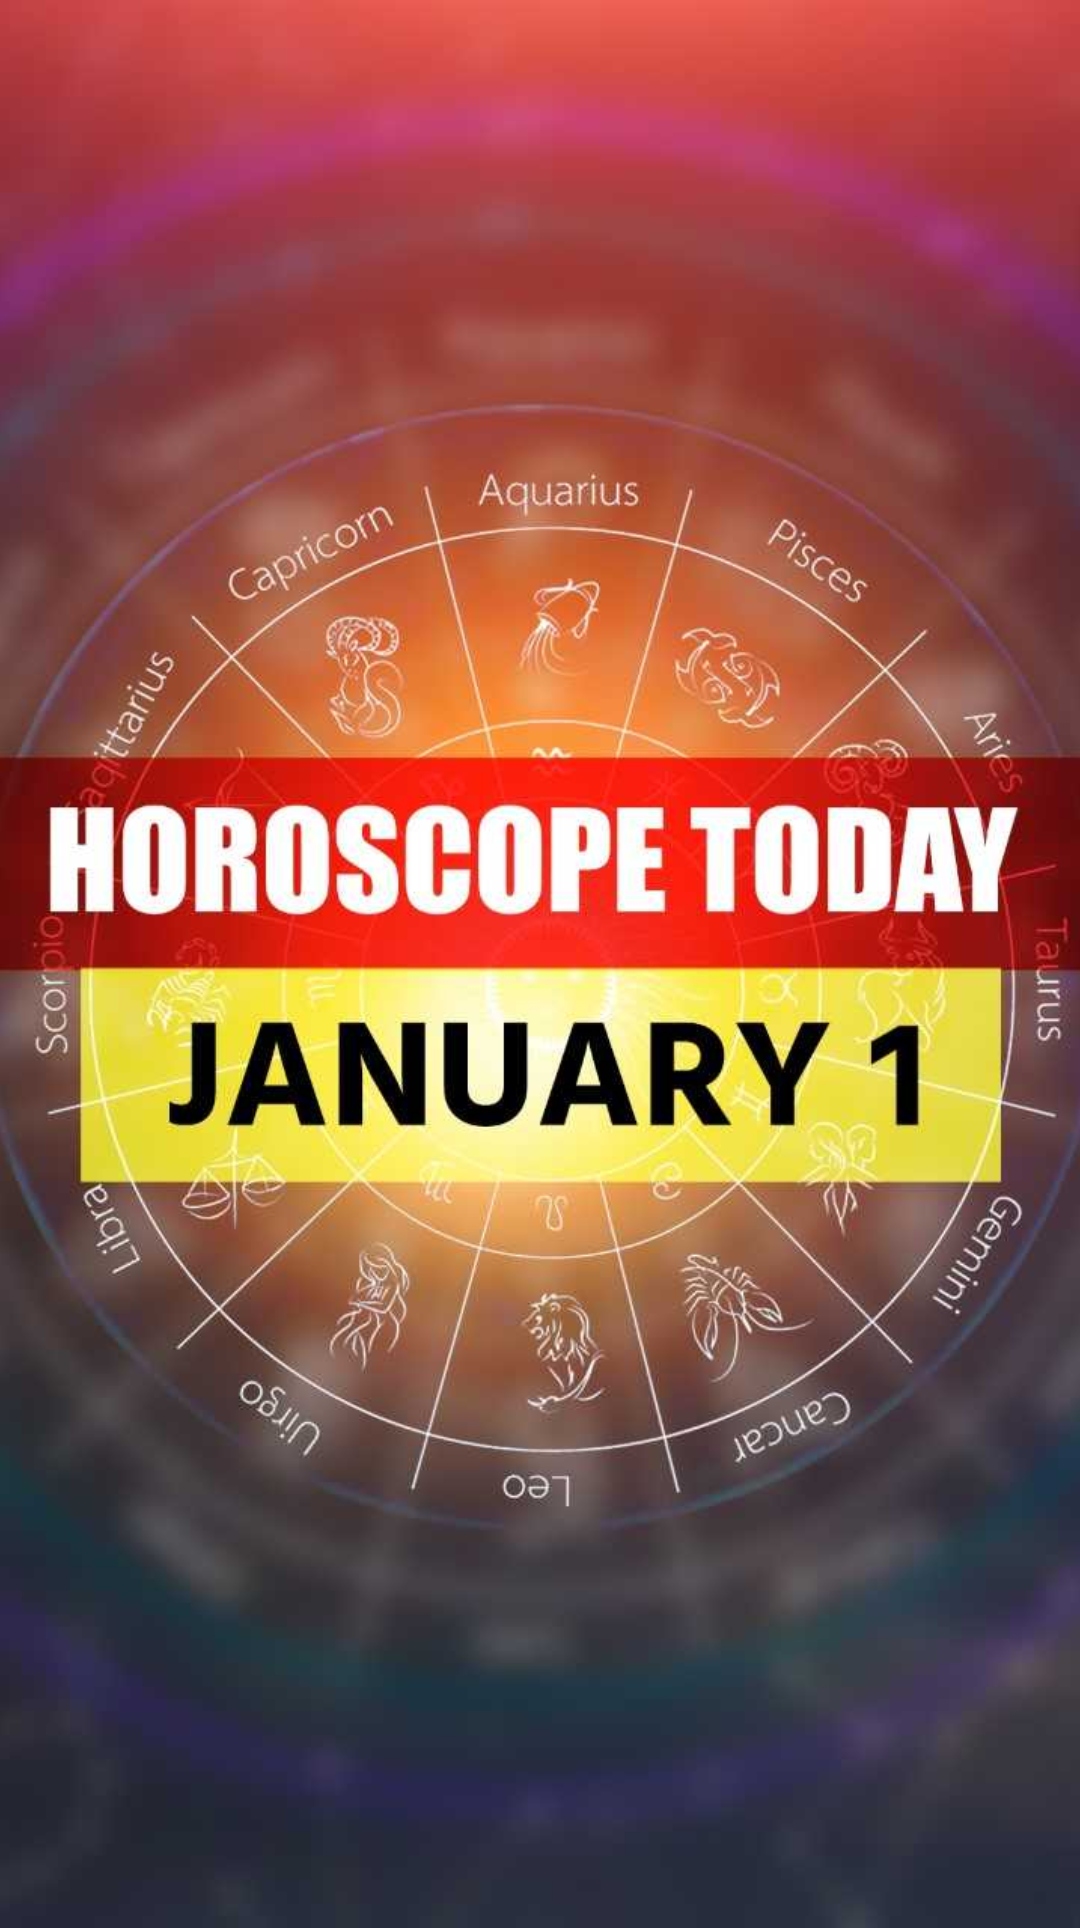 Business opportunities for Scorpions, know about other zodiac signs in horoscope for January 1